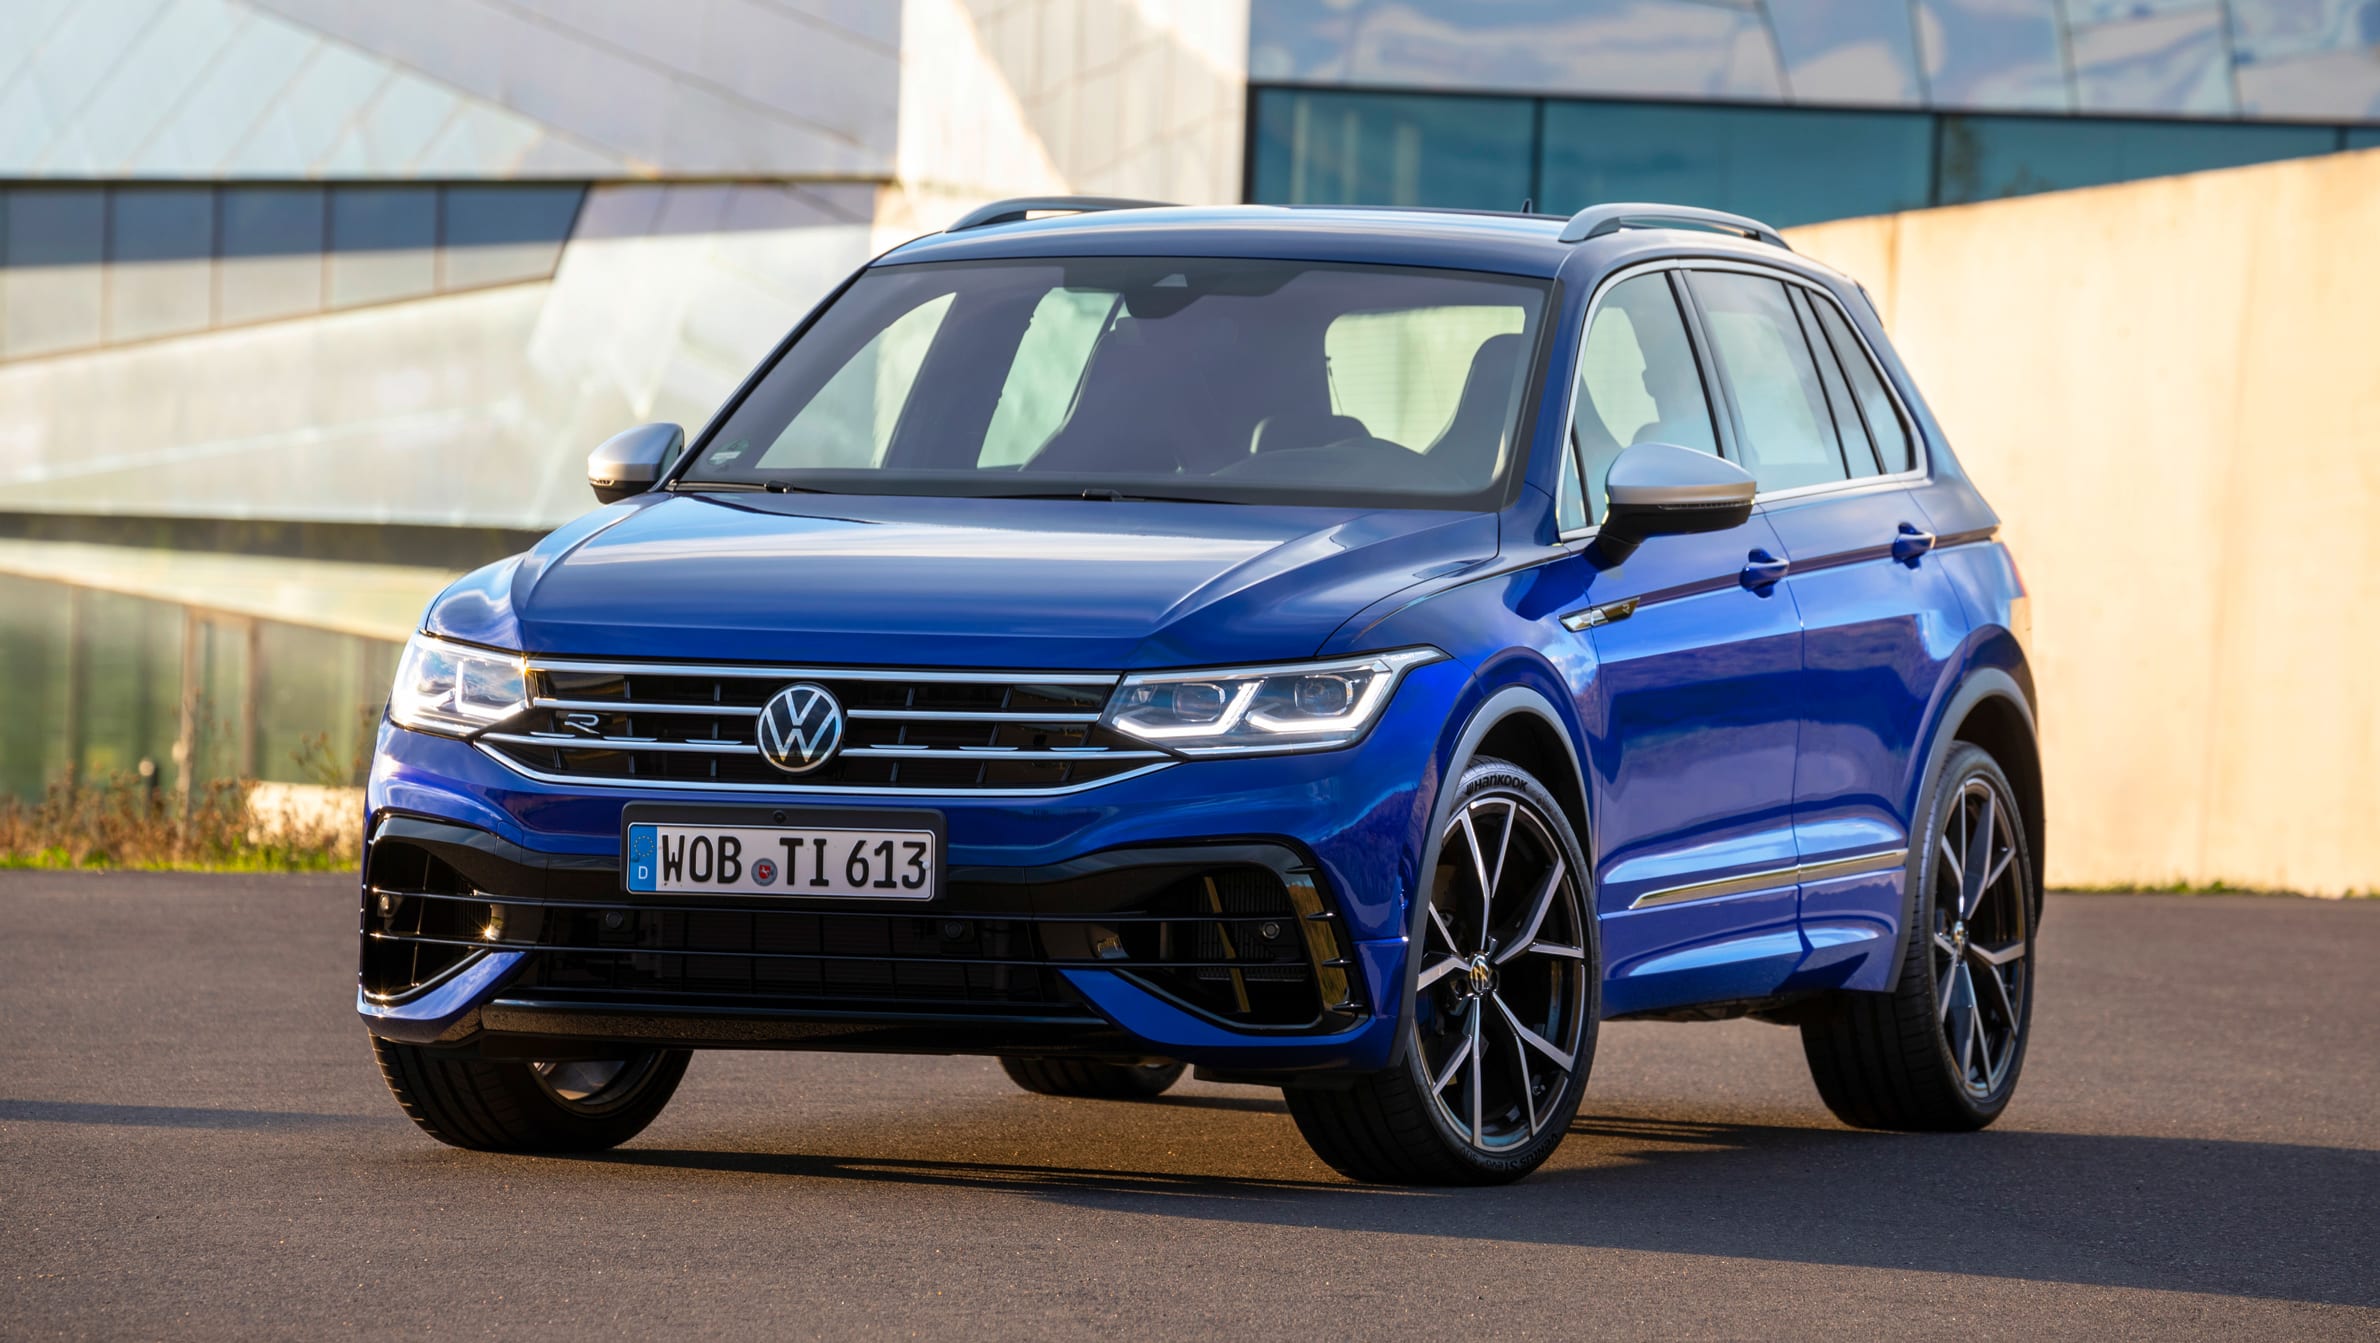 2022 Volkswagen Tiguan R price and features: New cut-price Audi SQ5, BMW X3  M40i and Mercedes-AMG GLC 43 rival to arrive in new year with power punch -  Car News